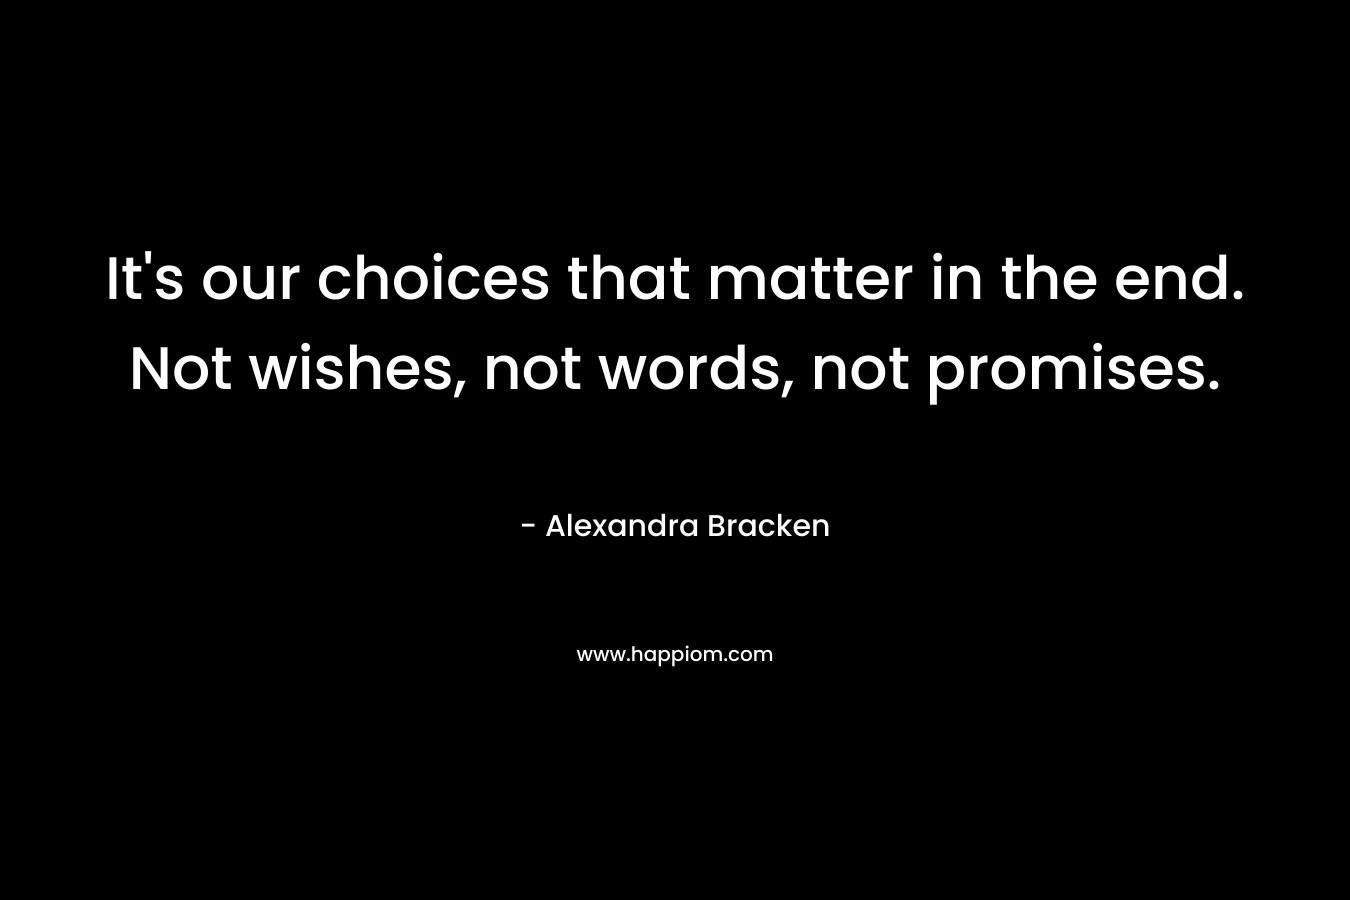 It's our choices that matter in the end. Not wishes, not words, not promises.